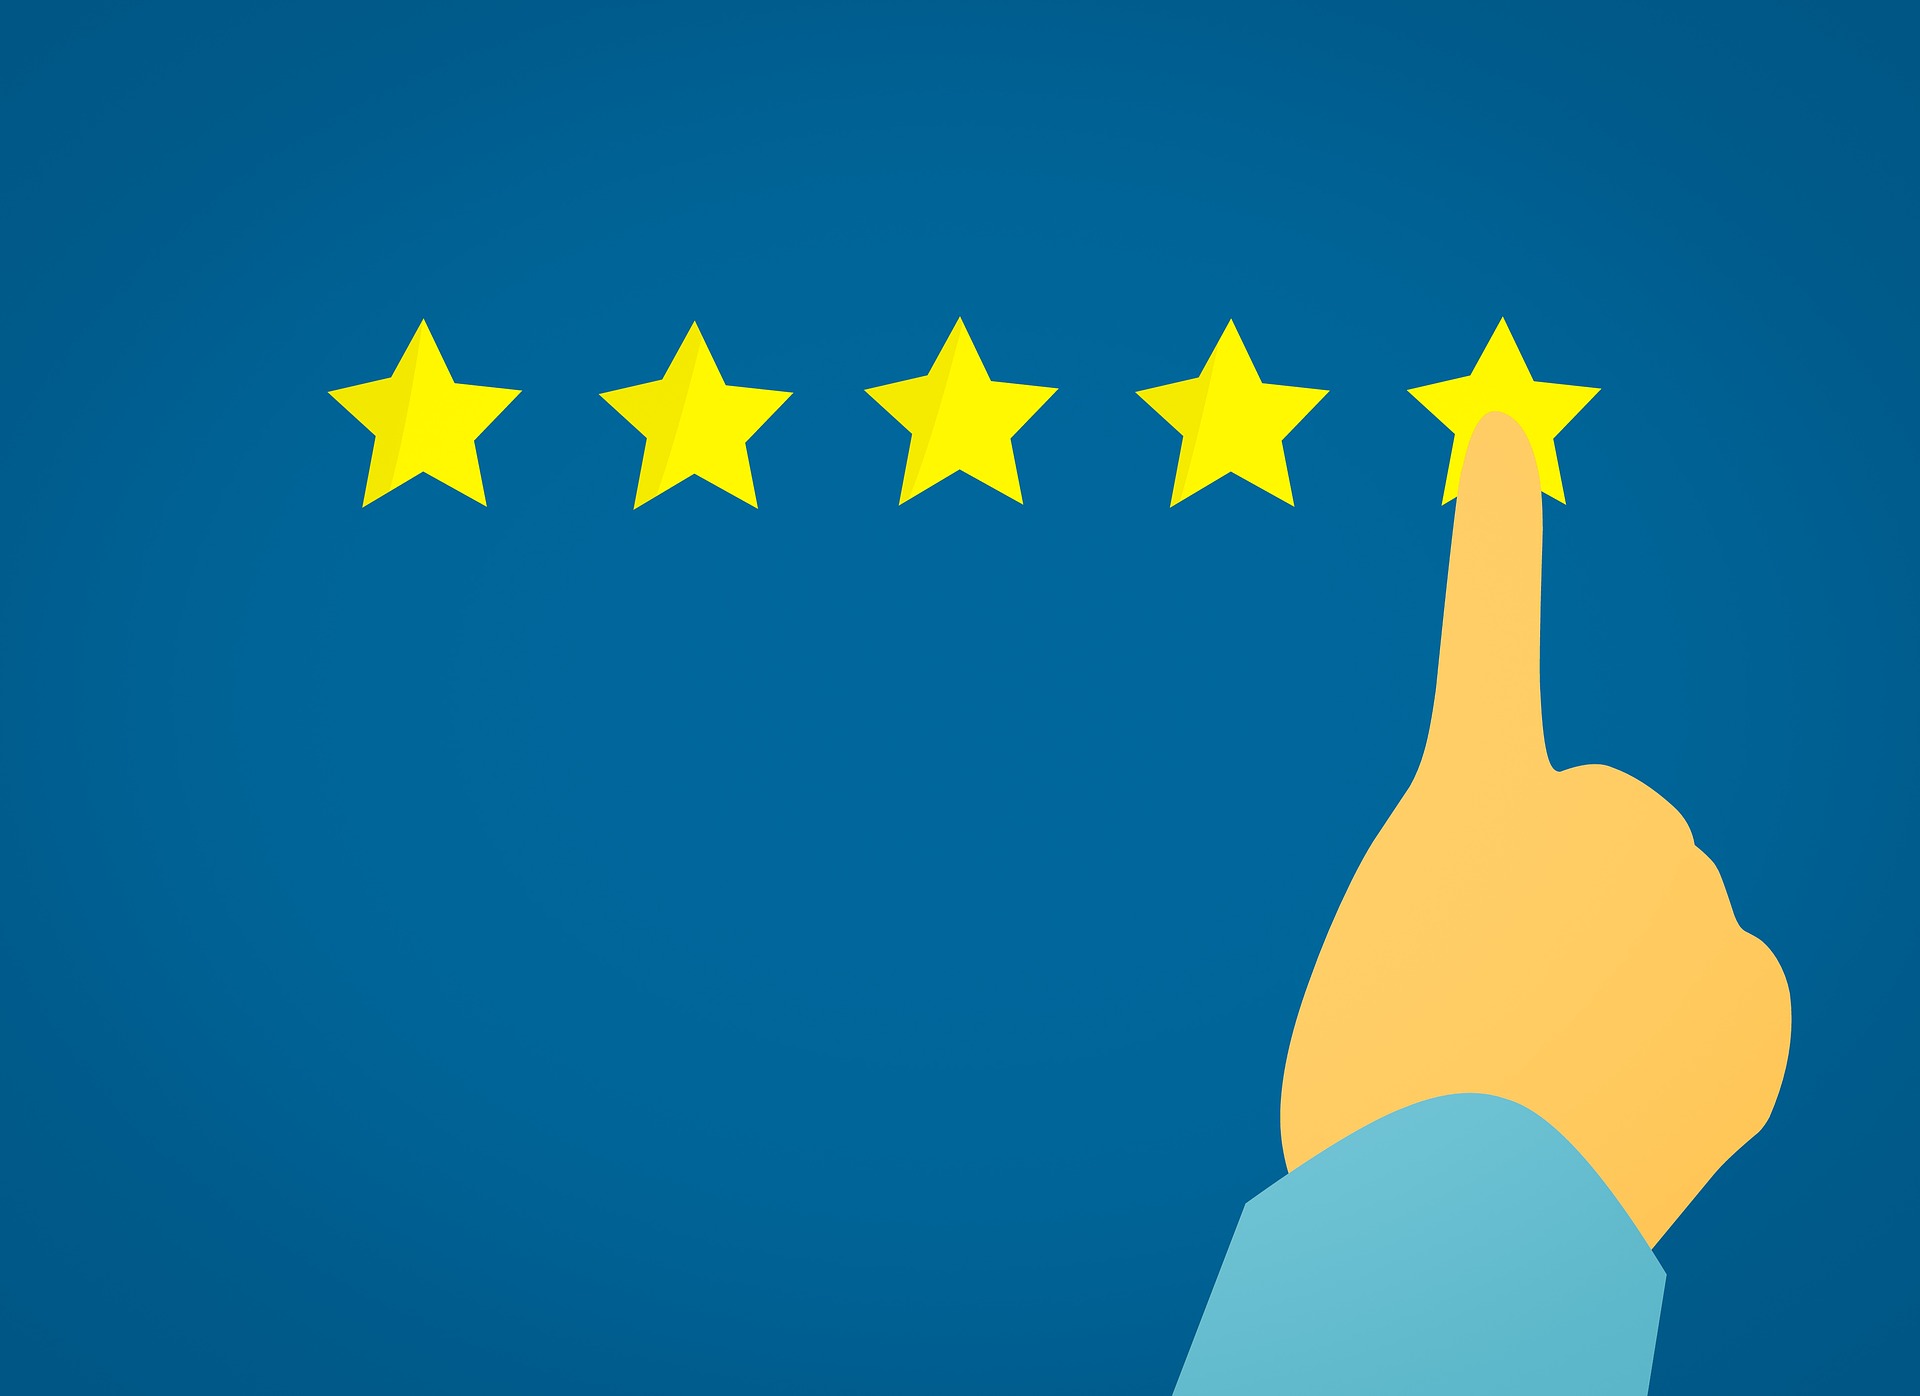 An online survey taker selects five stars for their review